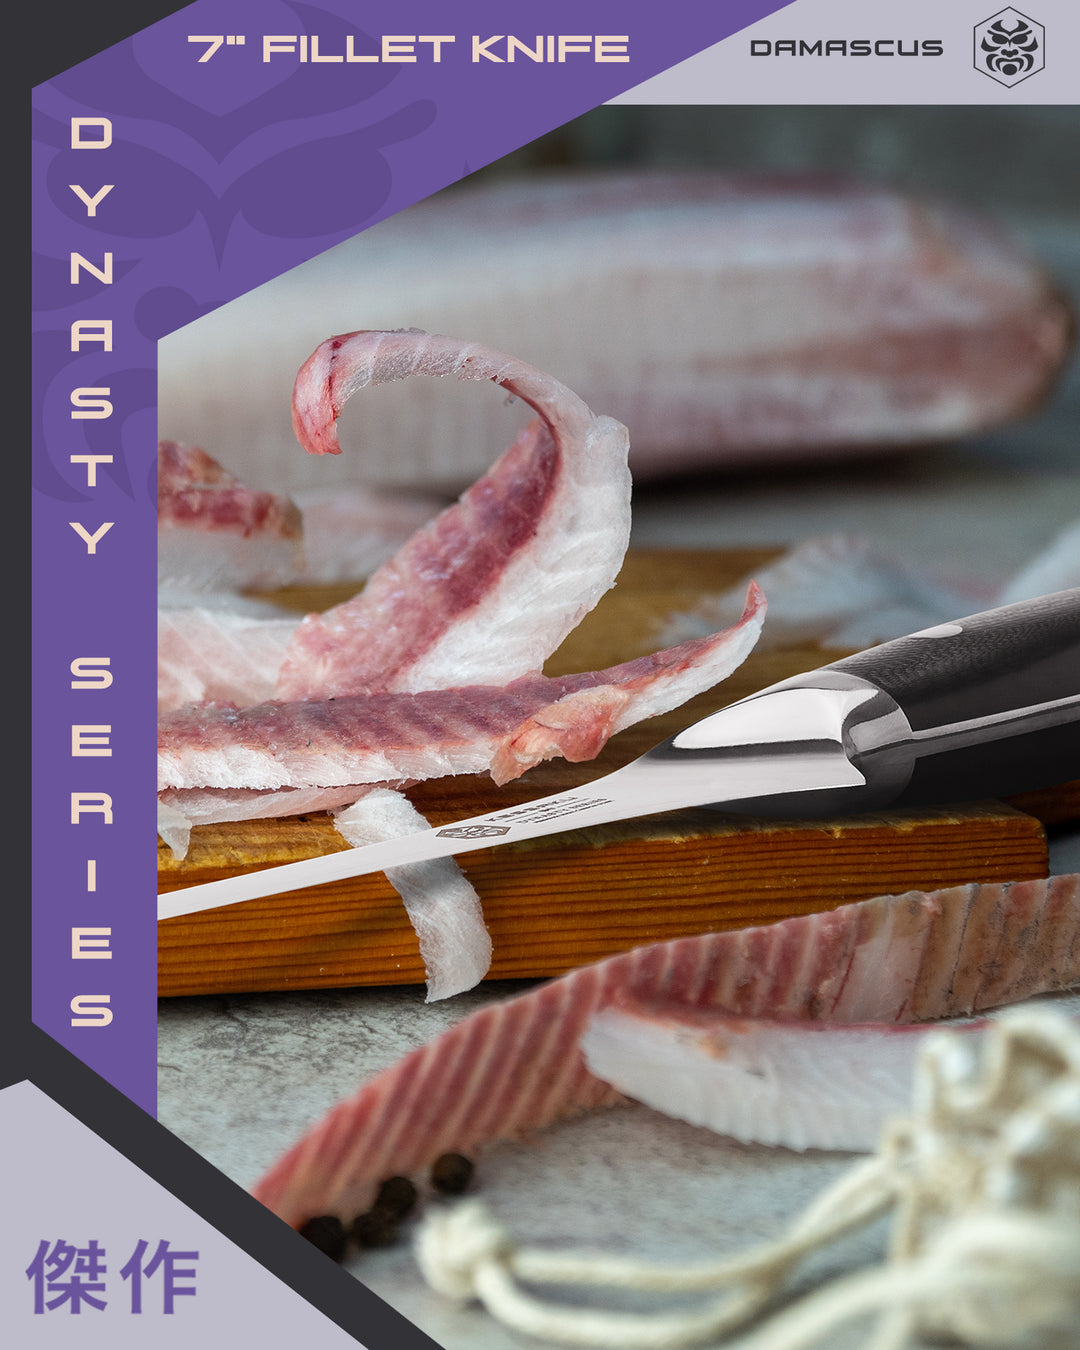 Thin sliced strips of fish and the Dynasty Damascus Fillet Knife lay on a cutting board.